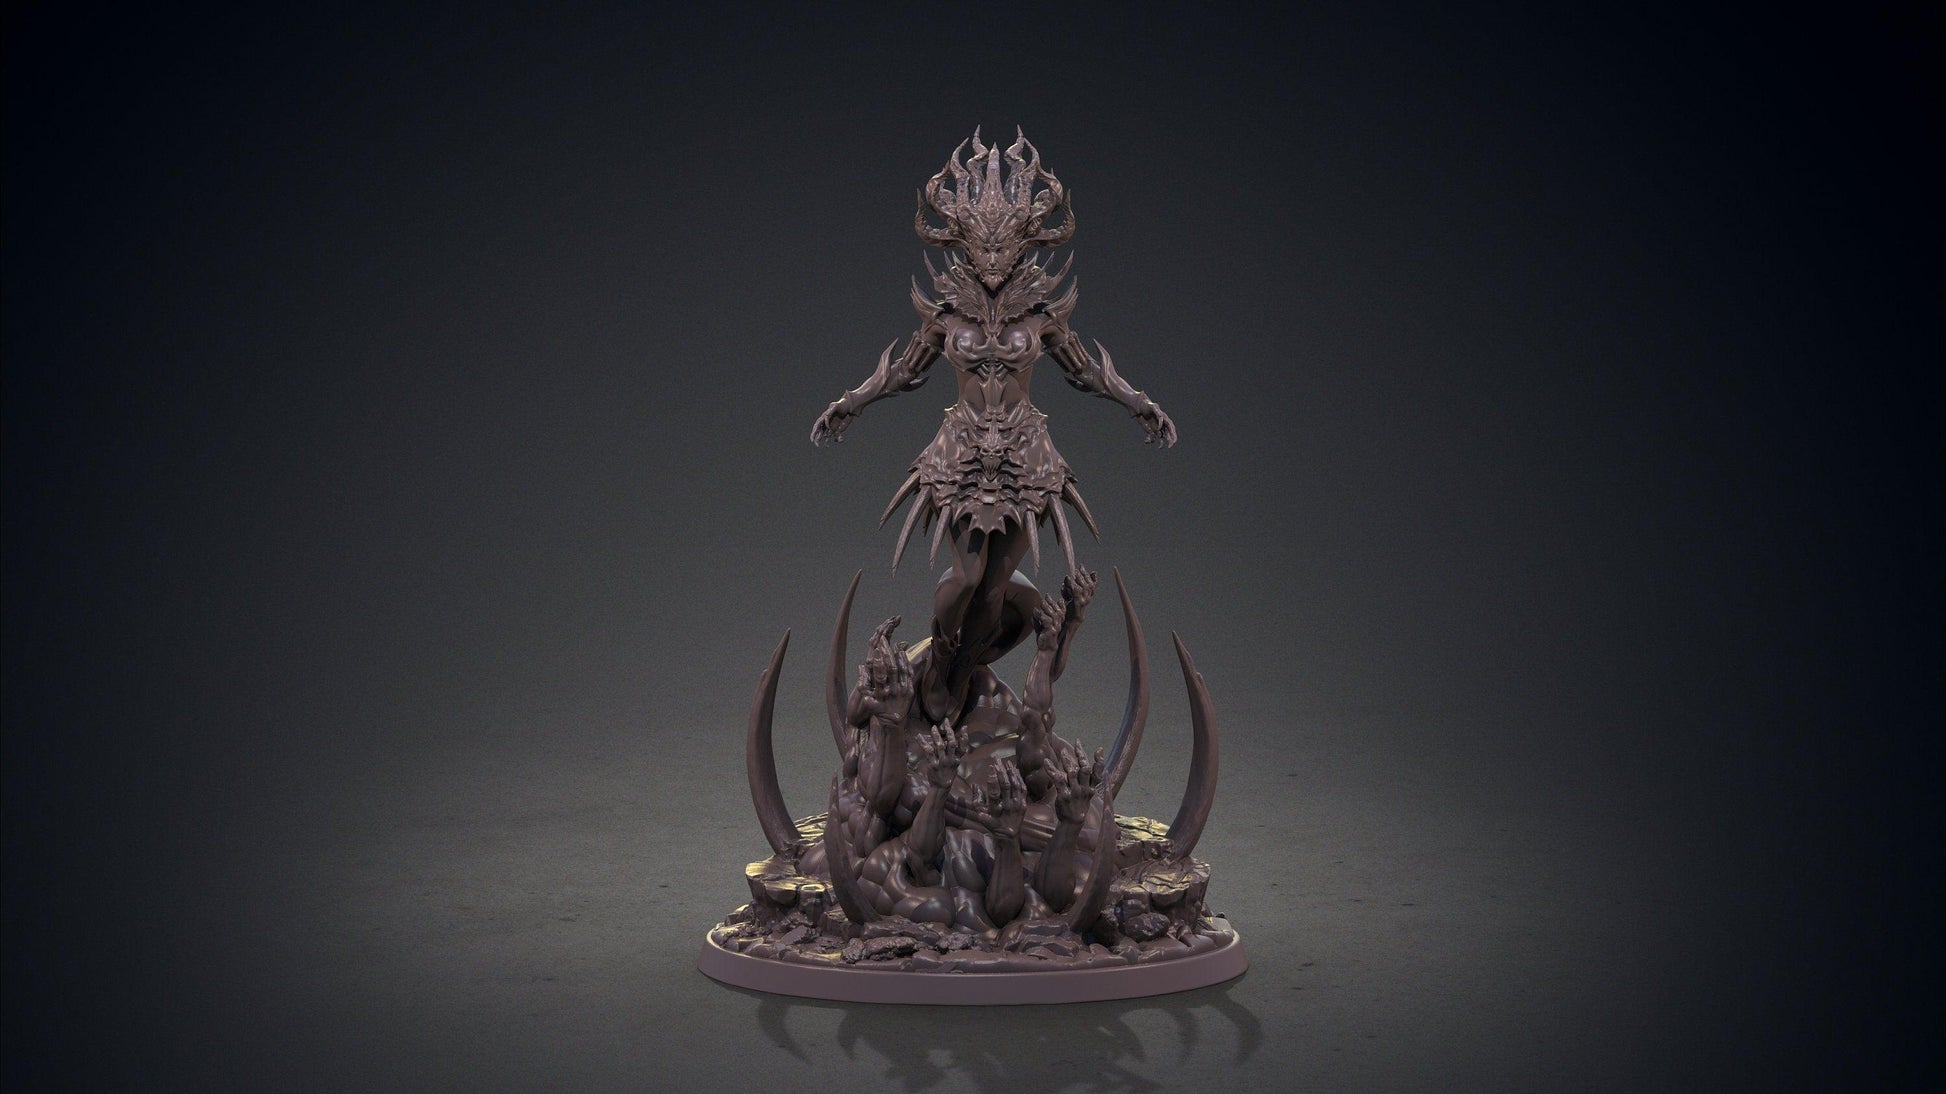 Beatrice Demon Miniature Witch Miniatures | Clay Cyanide | Dante's Inferno | Tabletop Gaming | DnD Miniature | Dungeons and Dragons dnd 5e - Plague Miniatures shop for DnD Miniatures